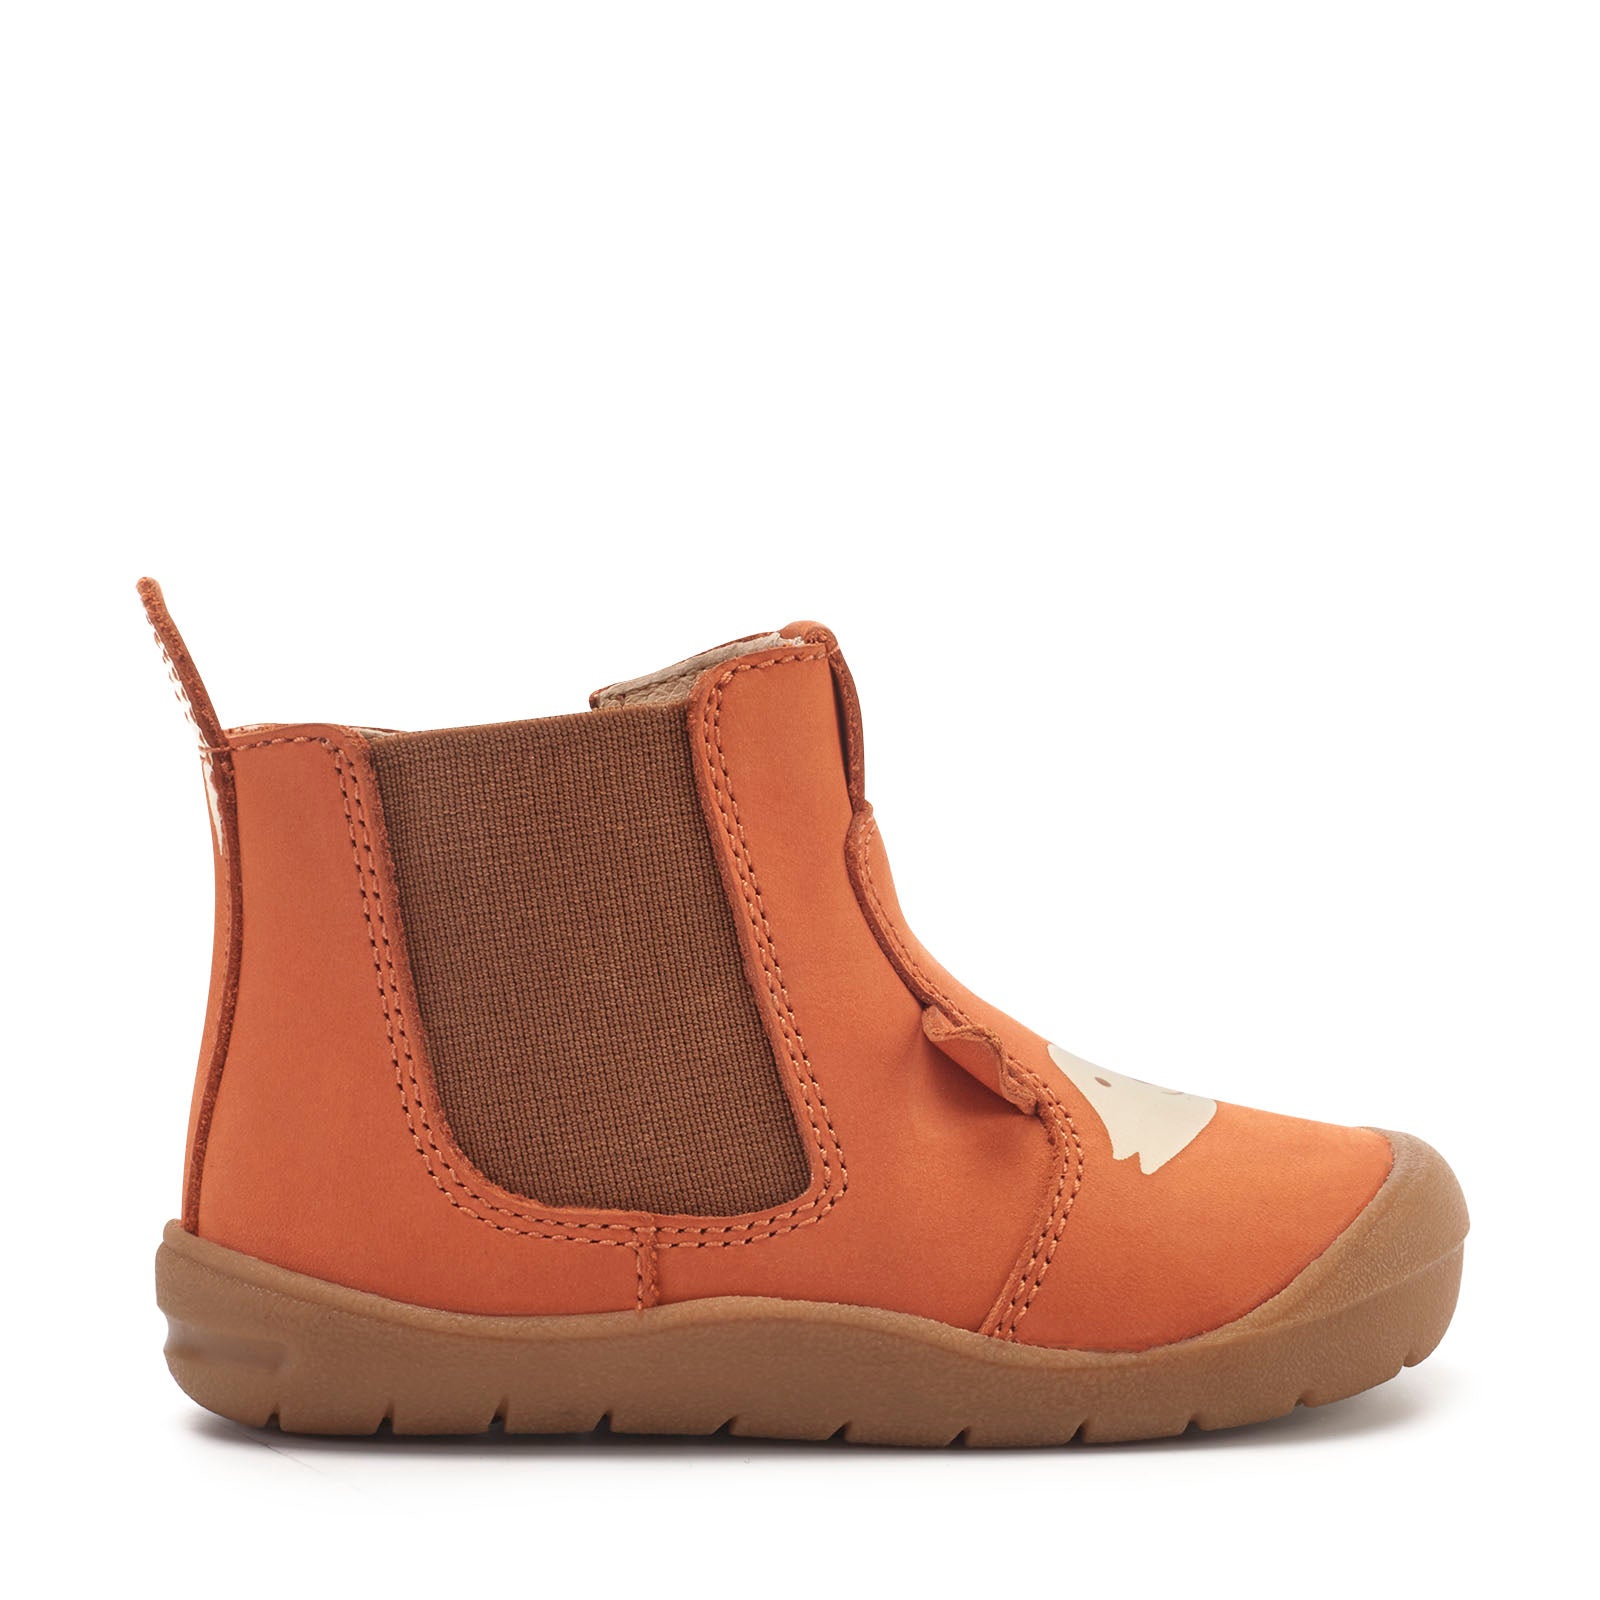 A unisex ankle boot by Start Rite and JoJo Maman Bebe, style Friend,in Rust nubuck and fox face, with zip fastening. Right side view.